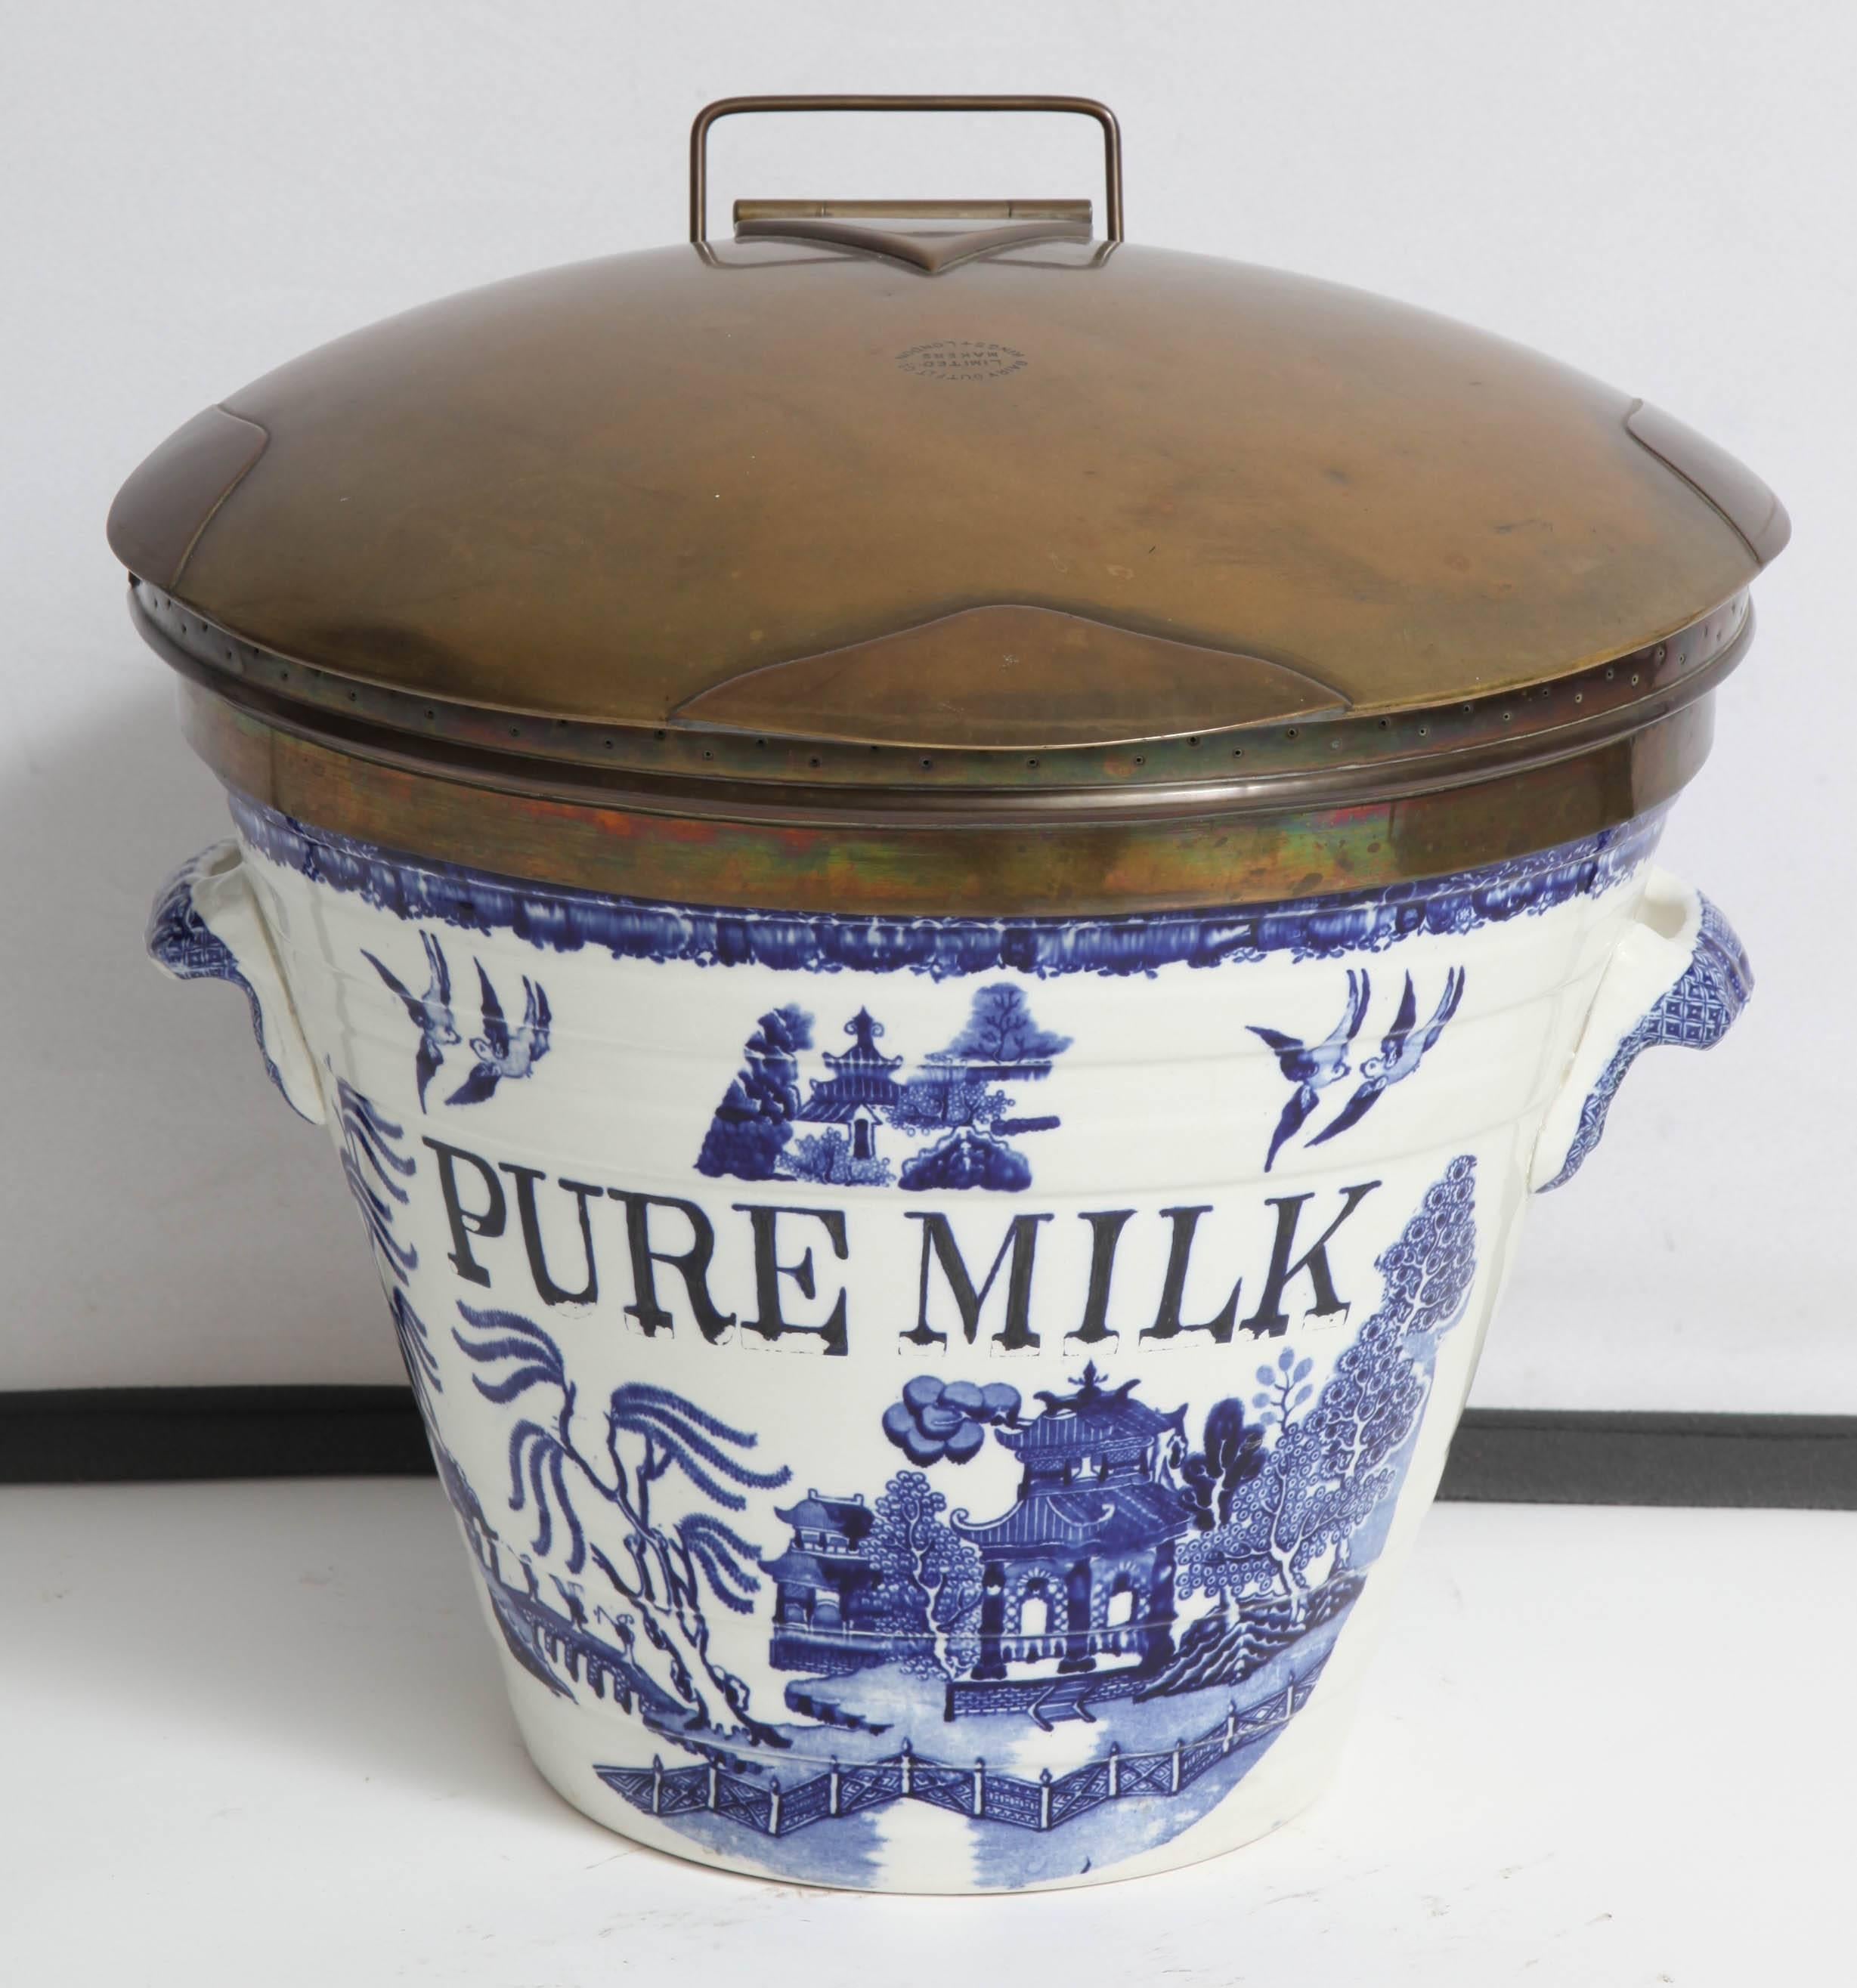 Extraordinary traditional milk pail with the Classic blue willow motif.
Designed by Thomas Minton, circa 1790s. The blue willow pattern has been a staple in English housewares for over 200 years.

 